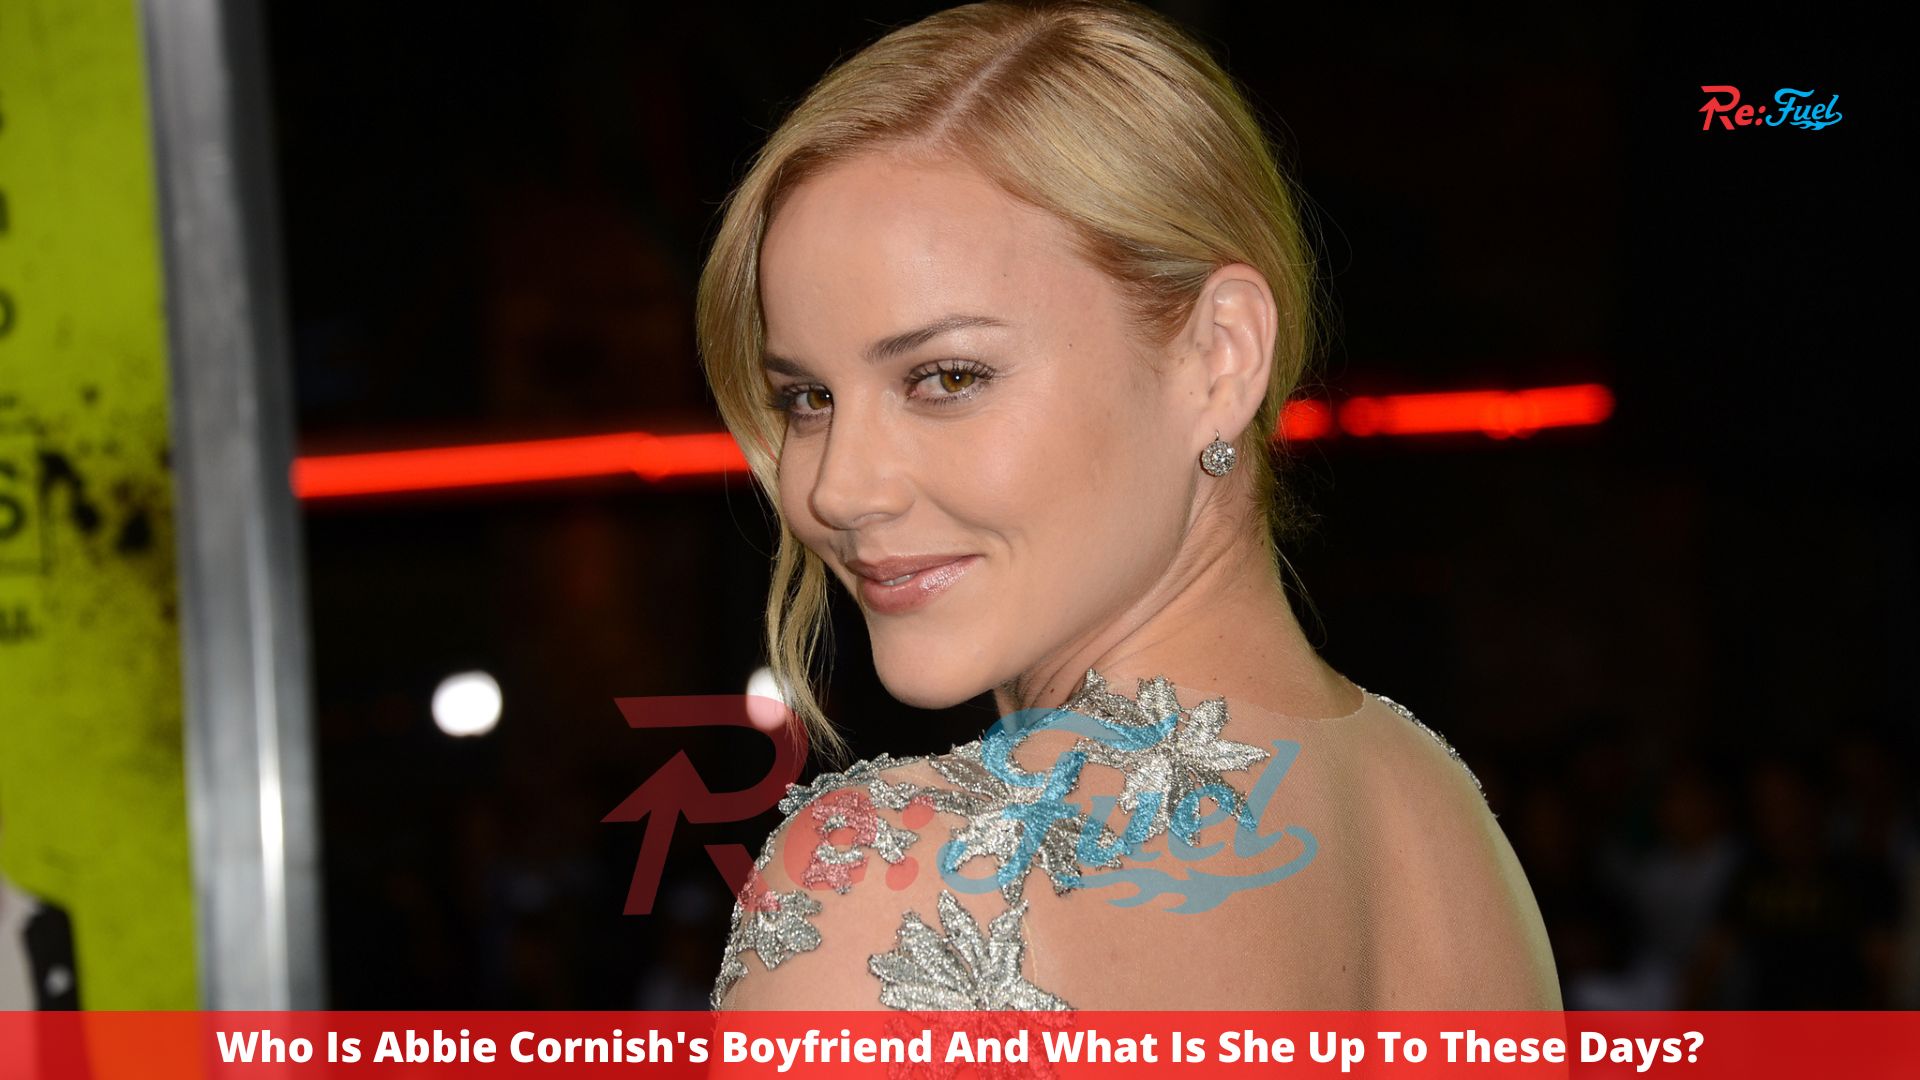 Who Is Abbie Cornish's Boyfriend And What Is She Up To These Days?